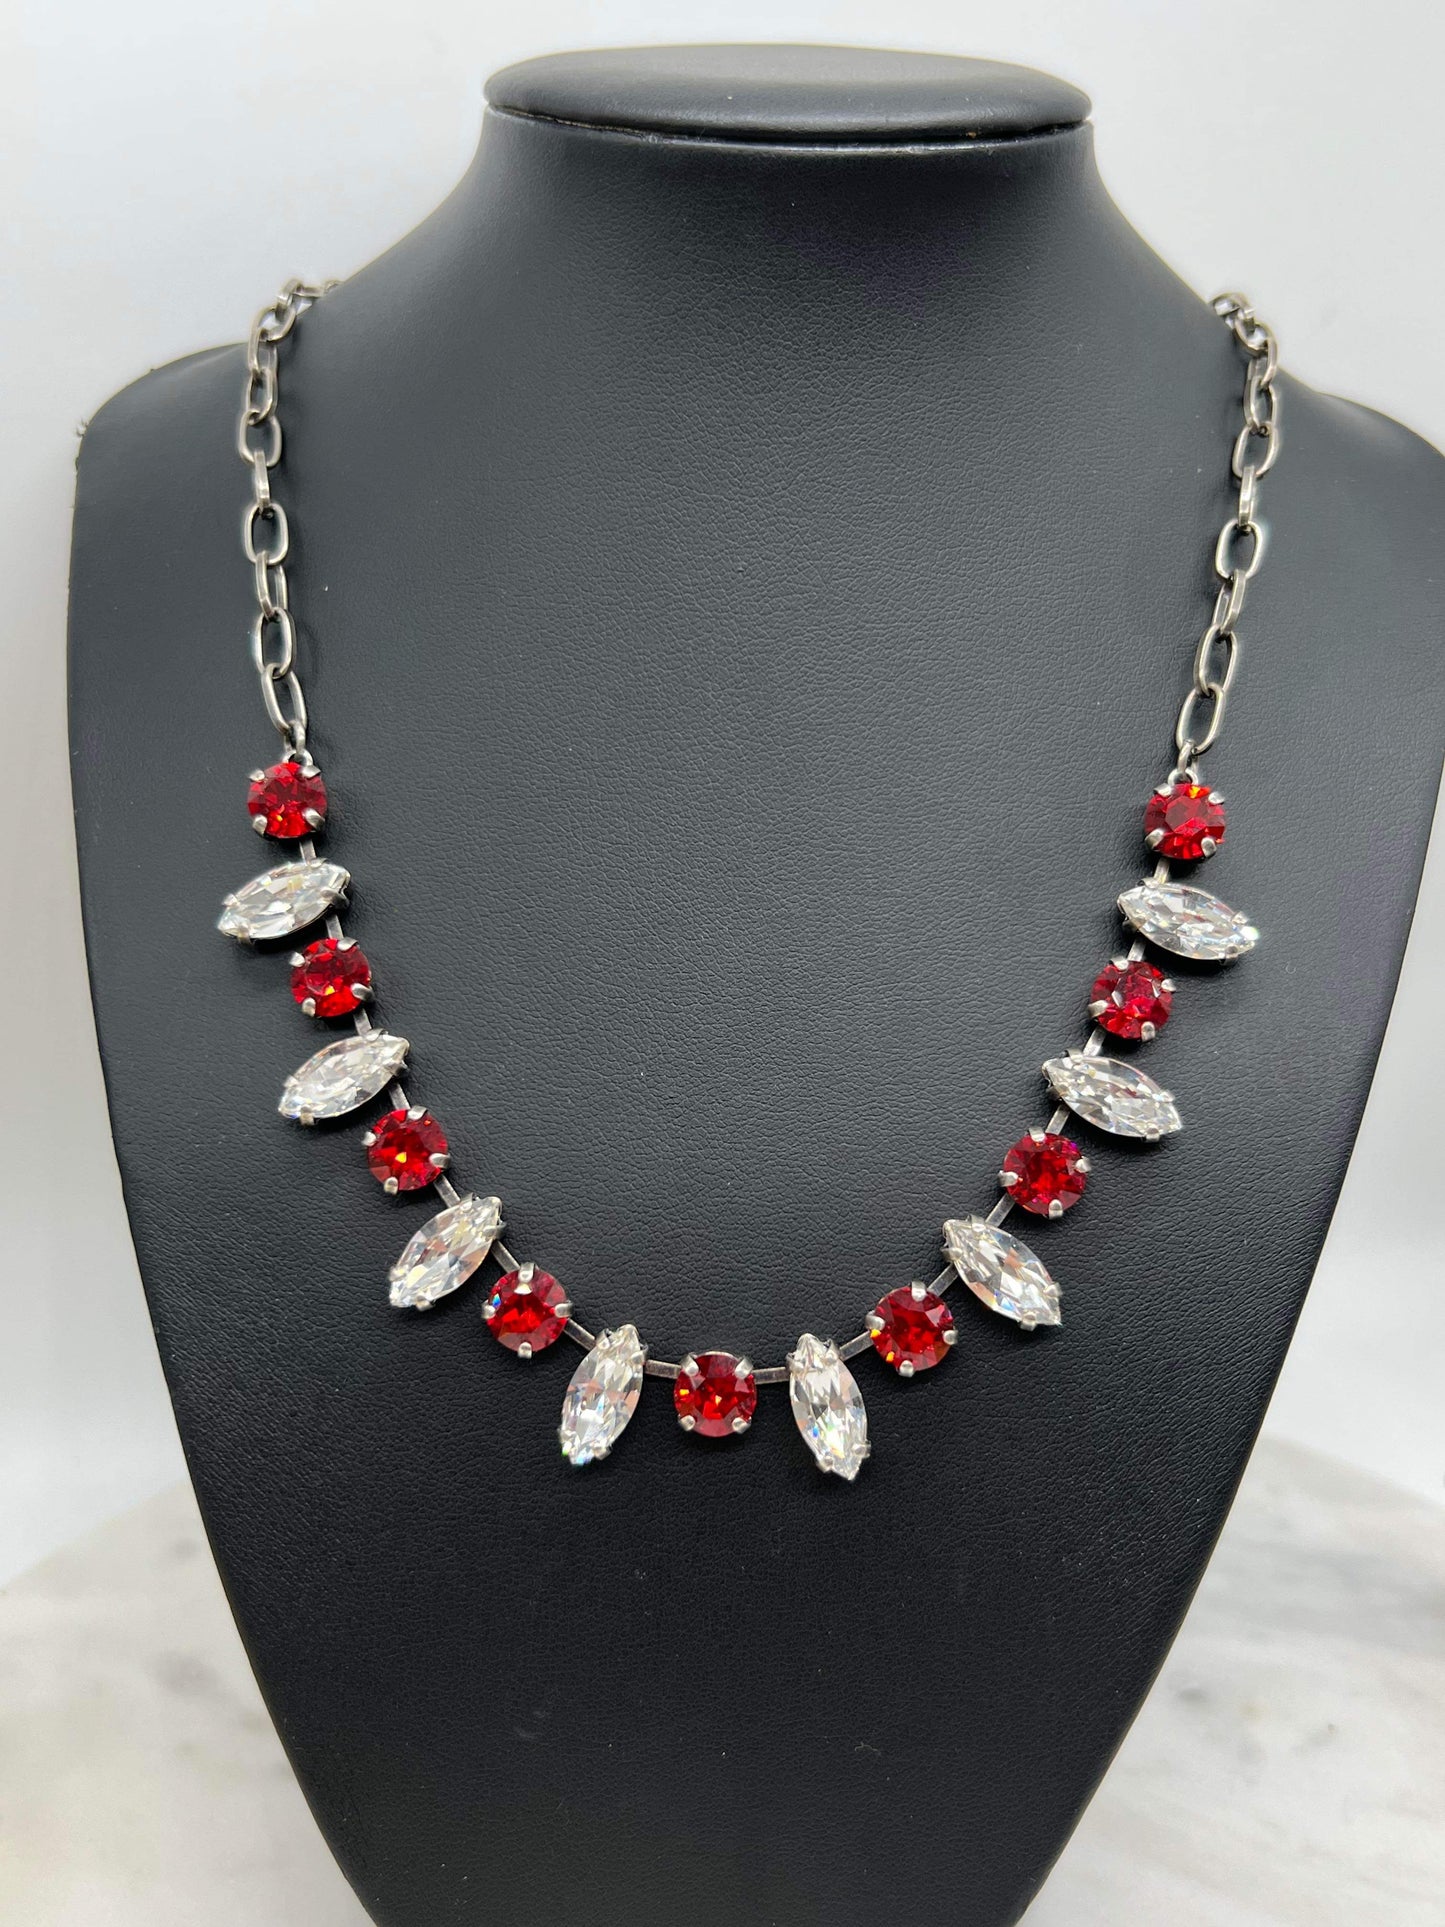 Simply Stunning Crystal and Red Necklace